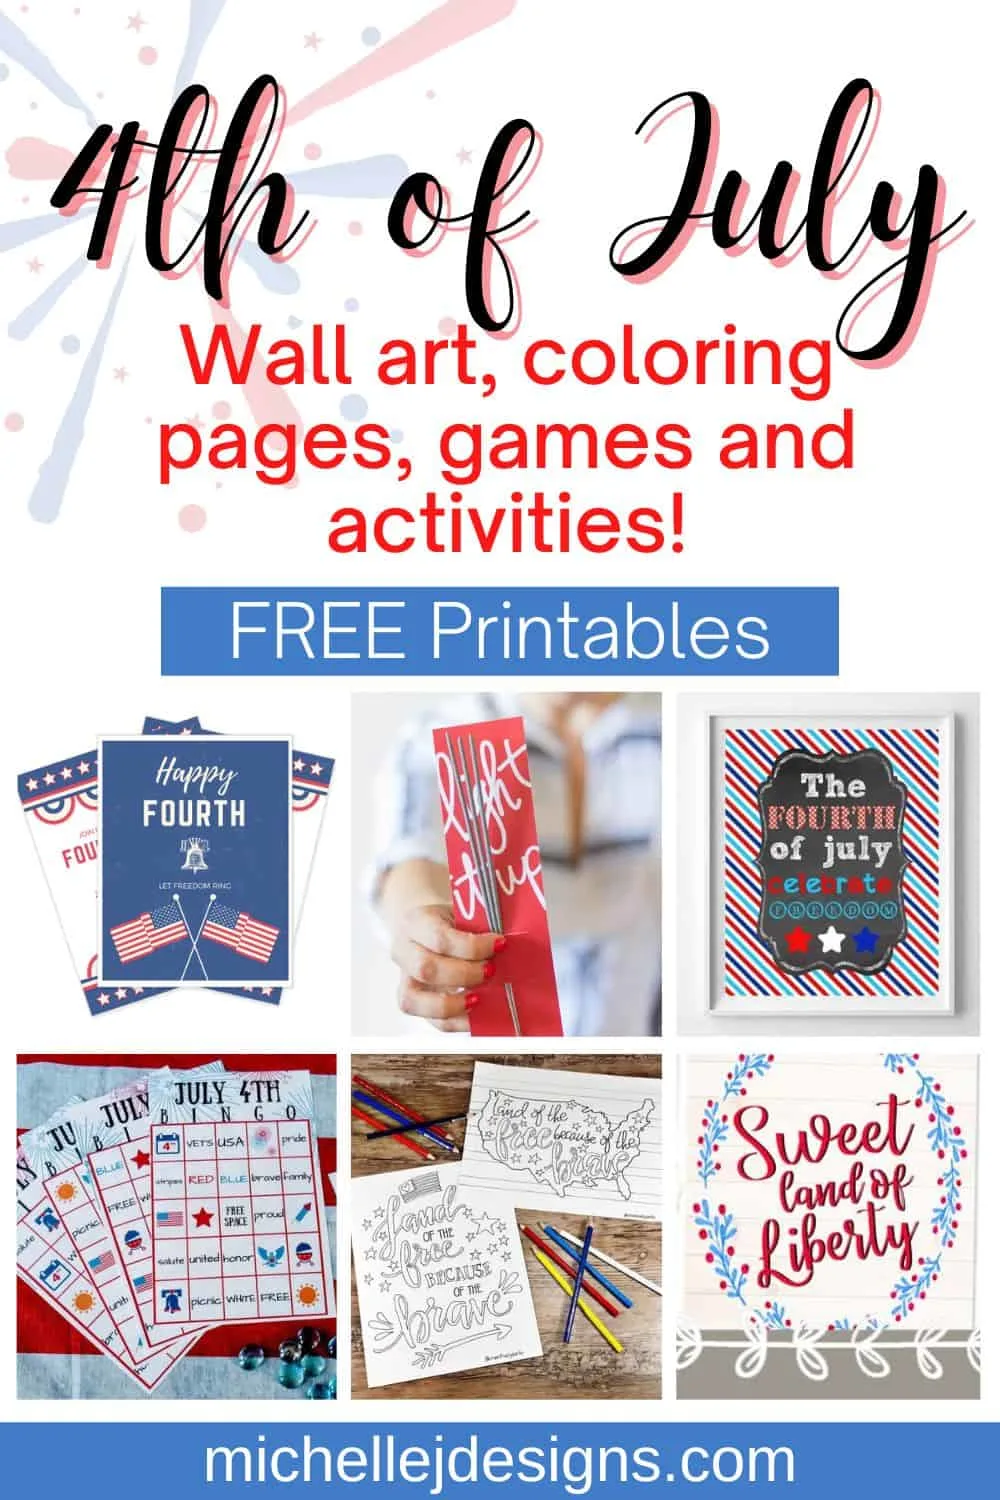 4th of july printable pin collage with text overlay